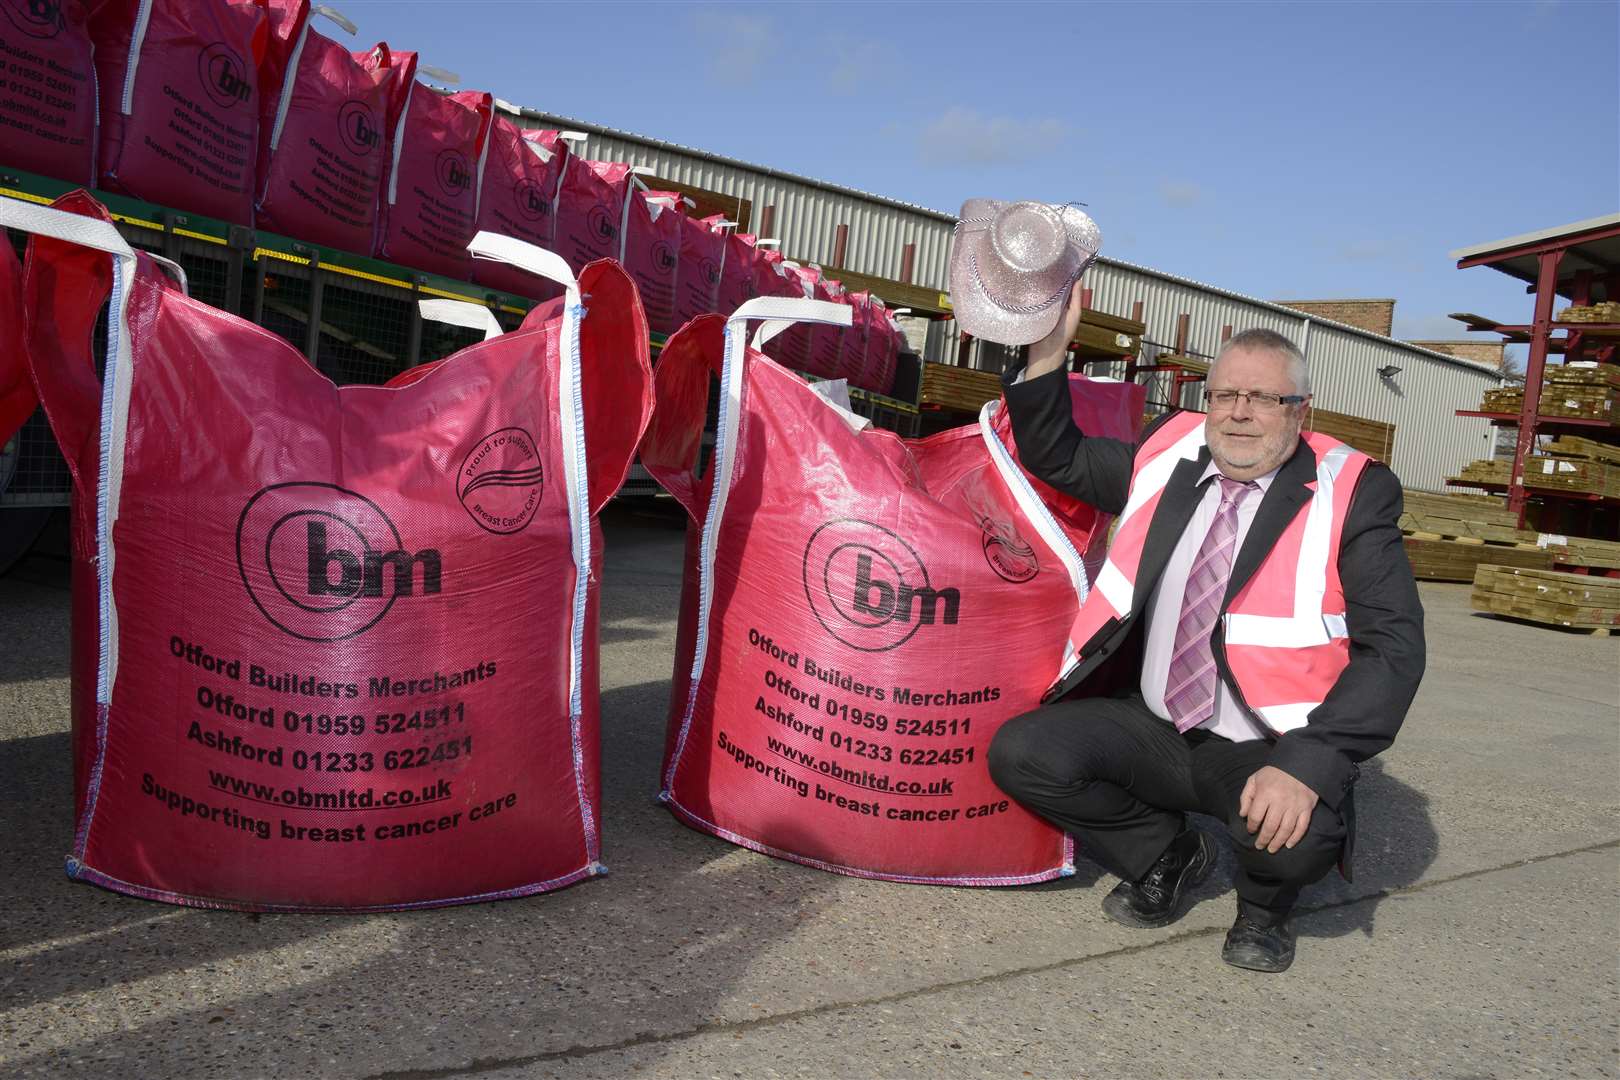 Otford Builders Merchants supported Breast Cancer Awareness with pink bags